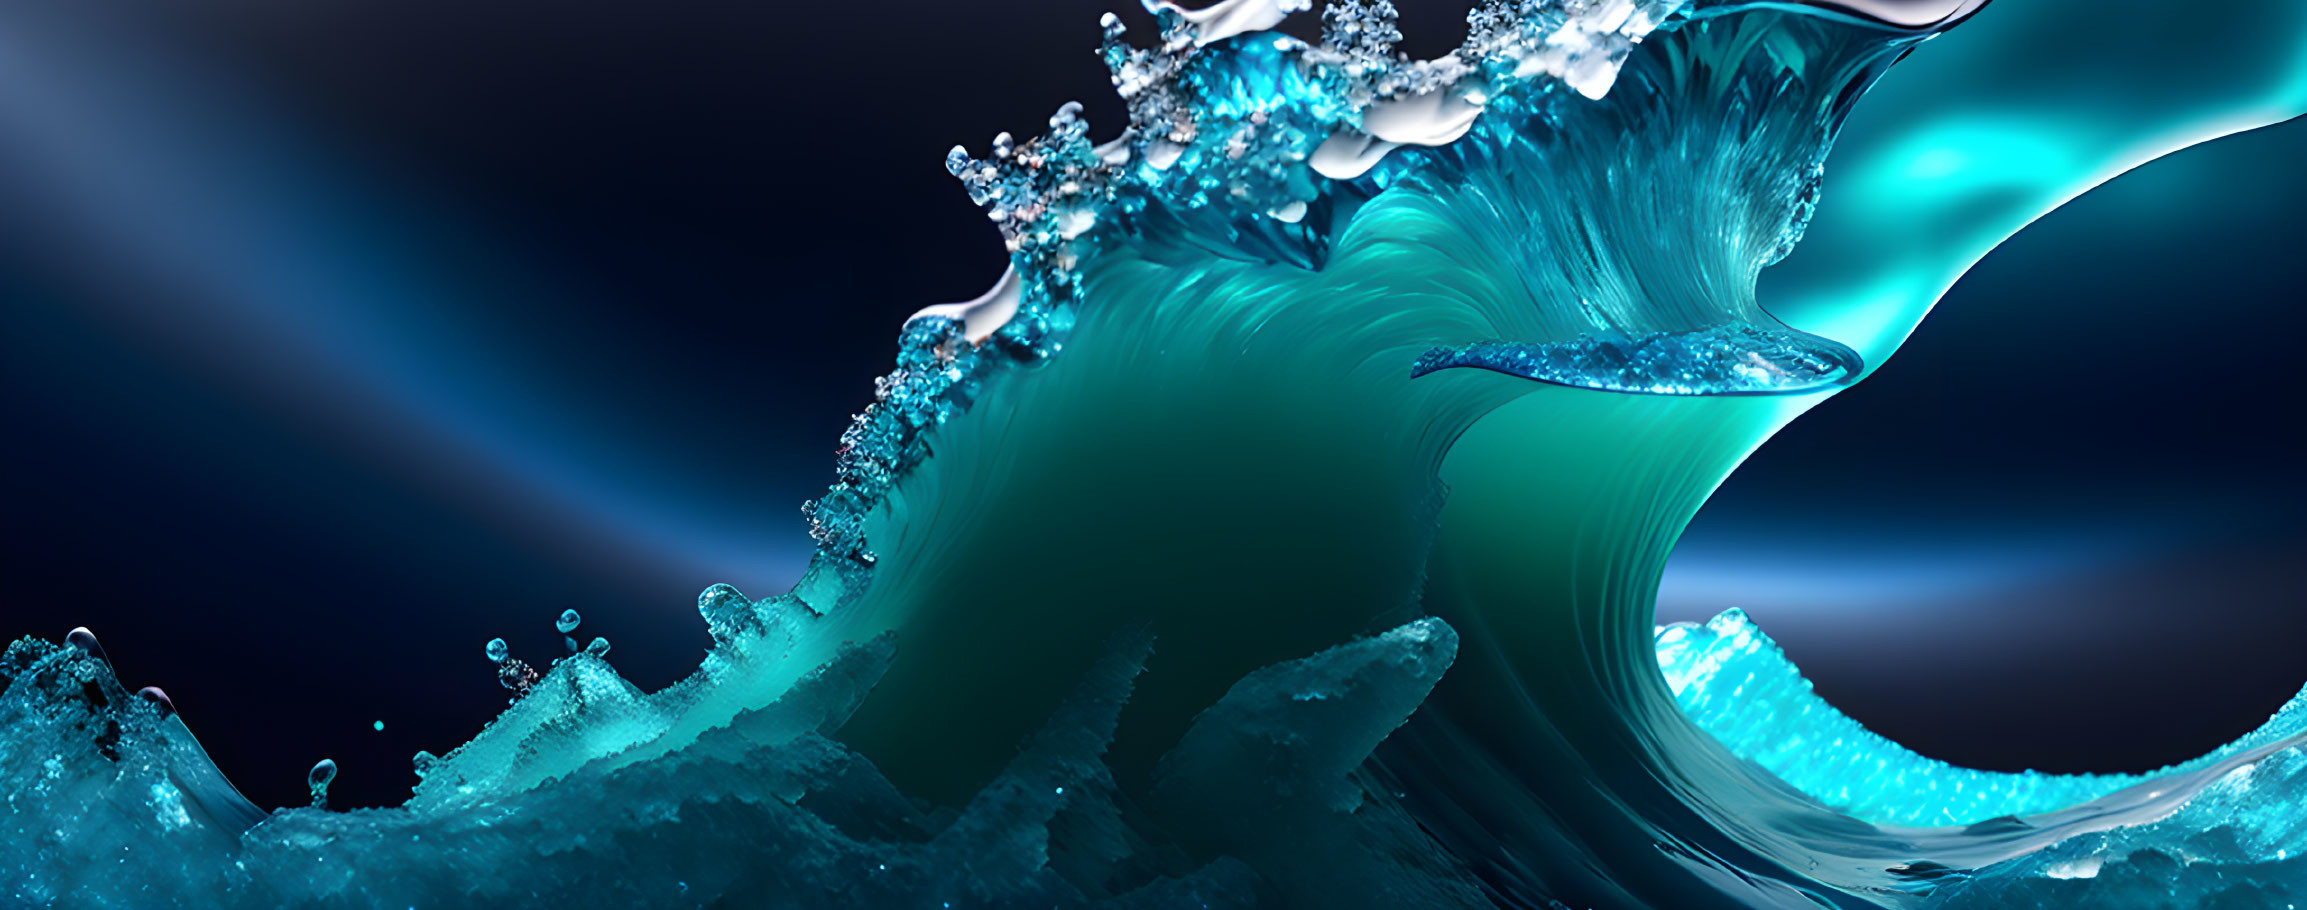 Dynamic Aqua-Colored Wave Artwork with Water Droplets on Dark Blue Gradient